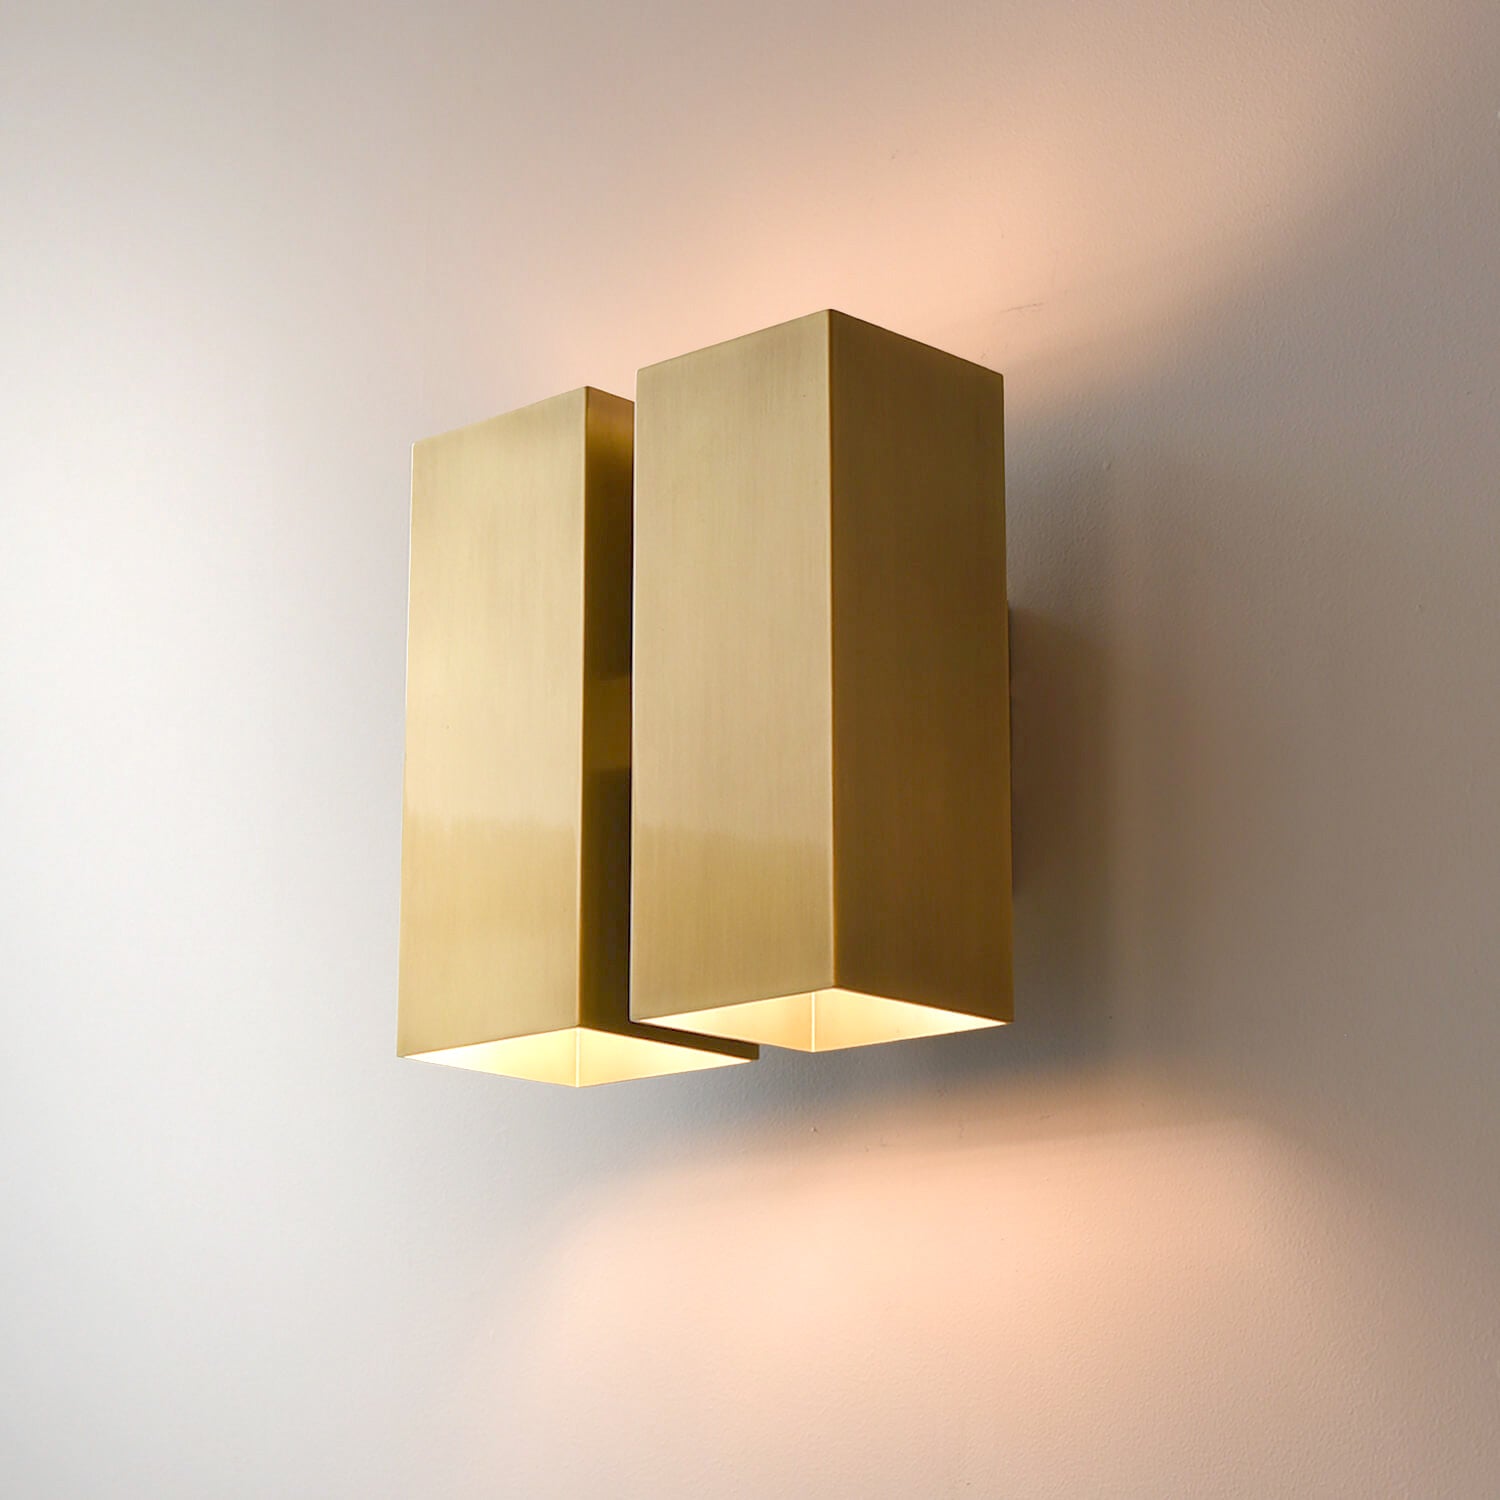 How to Select a Bedside Wall Lamp